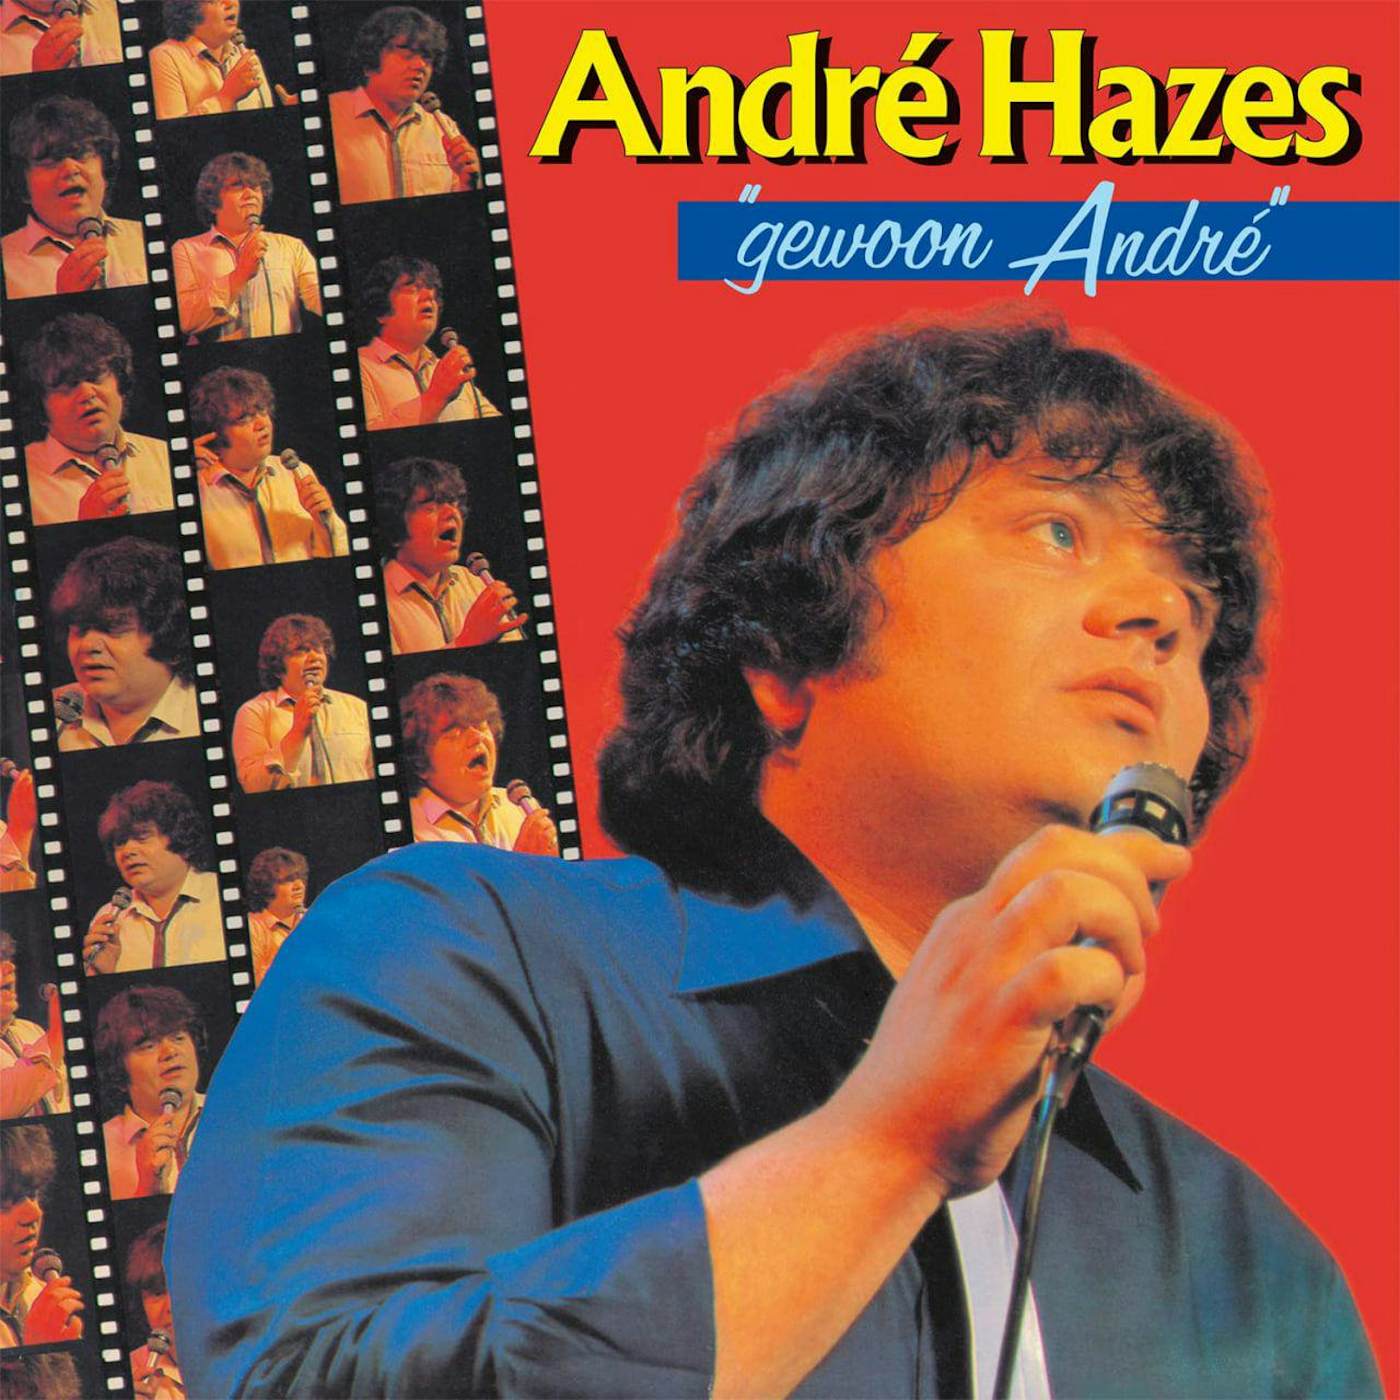 Andre Hazes Gewoon Andre (180g/Translucent Blue) Vinyl Record